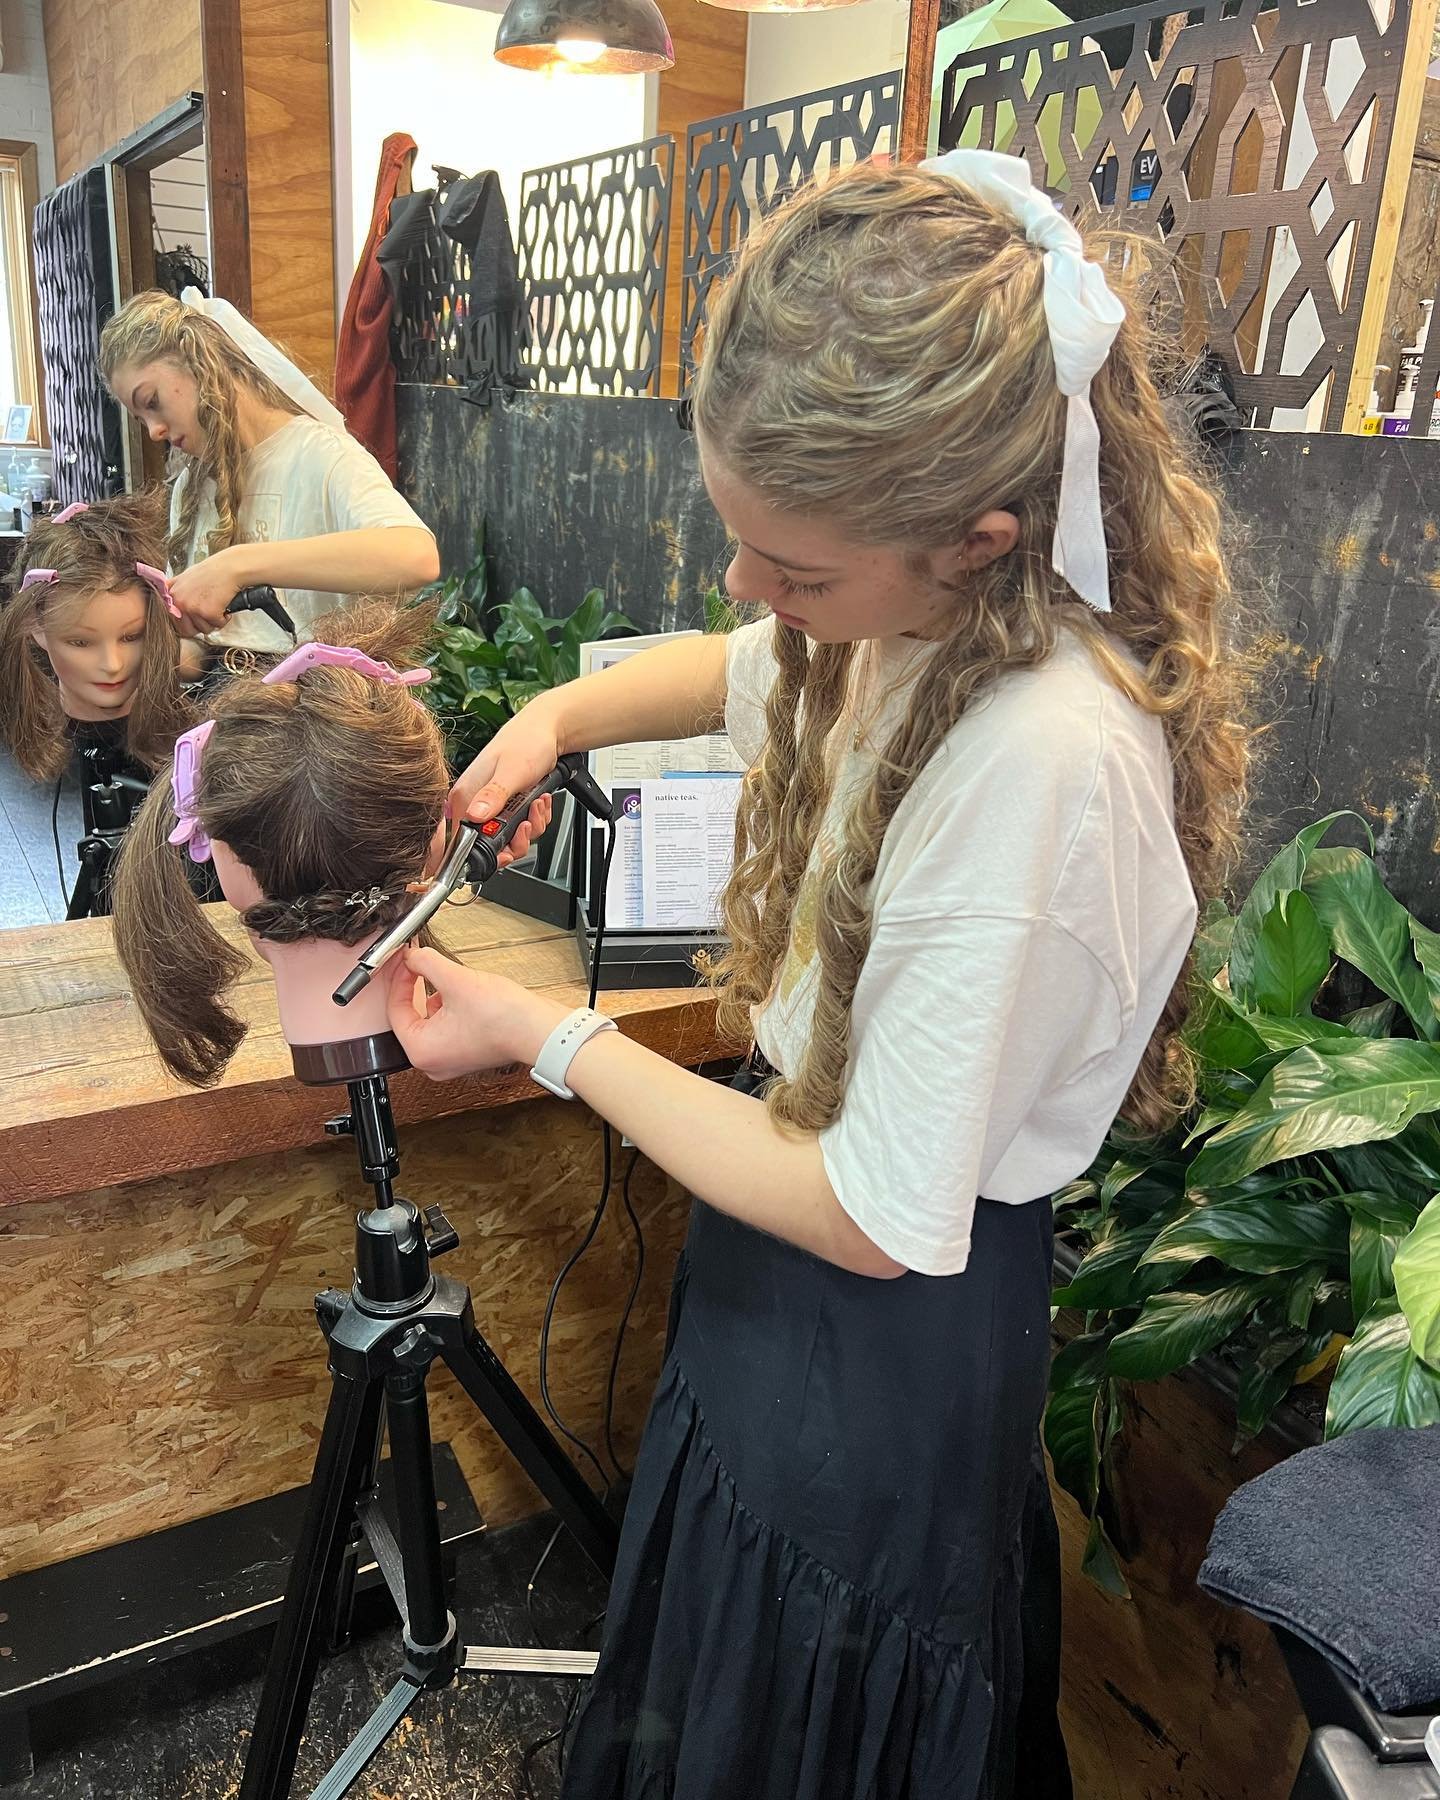 last week, our apprentices underwent &lsquo;hollywood wave&rsquo; training led by sarah 😍

the apprentices demonstrated great skill refinement during the session. 

individualised in-salon training with senior stylists is integral to our organic min